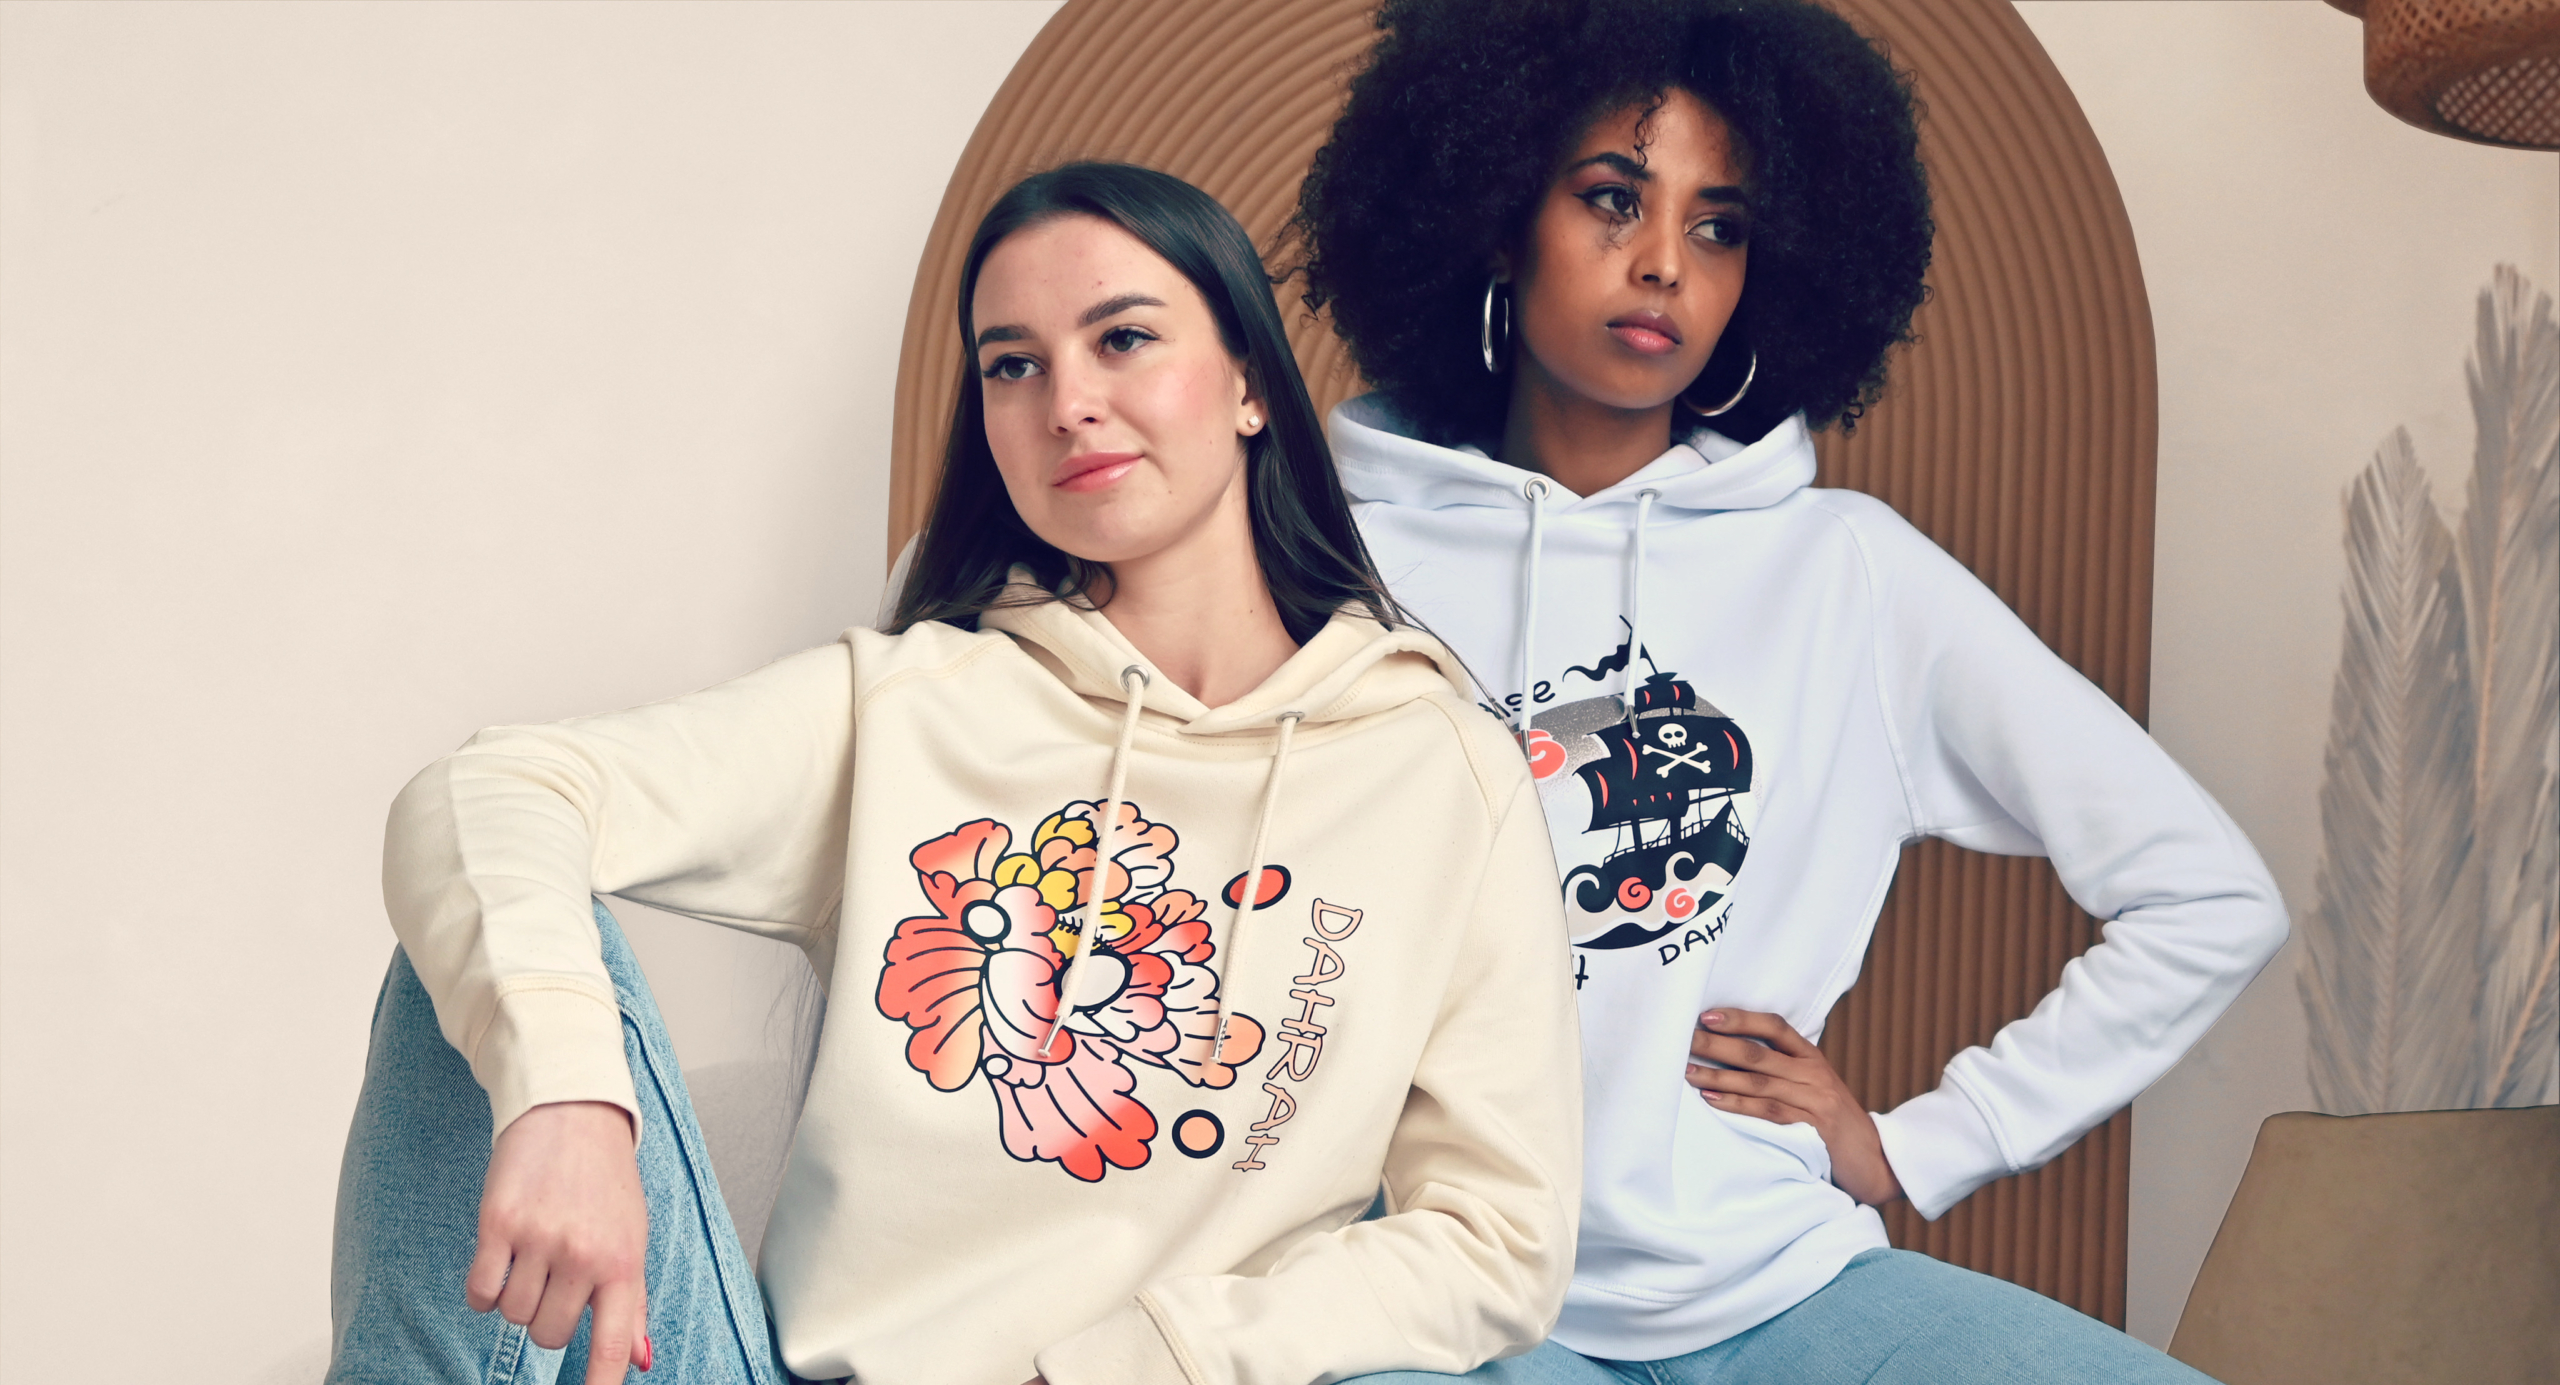 Dahrah Fashion is a brand of sustainable and organic hoodies and T-shirts based in The Netherlands